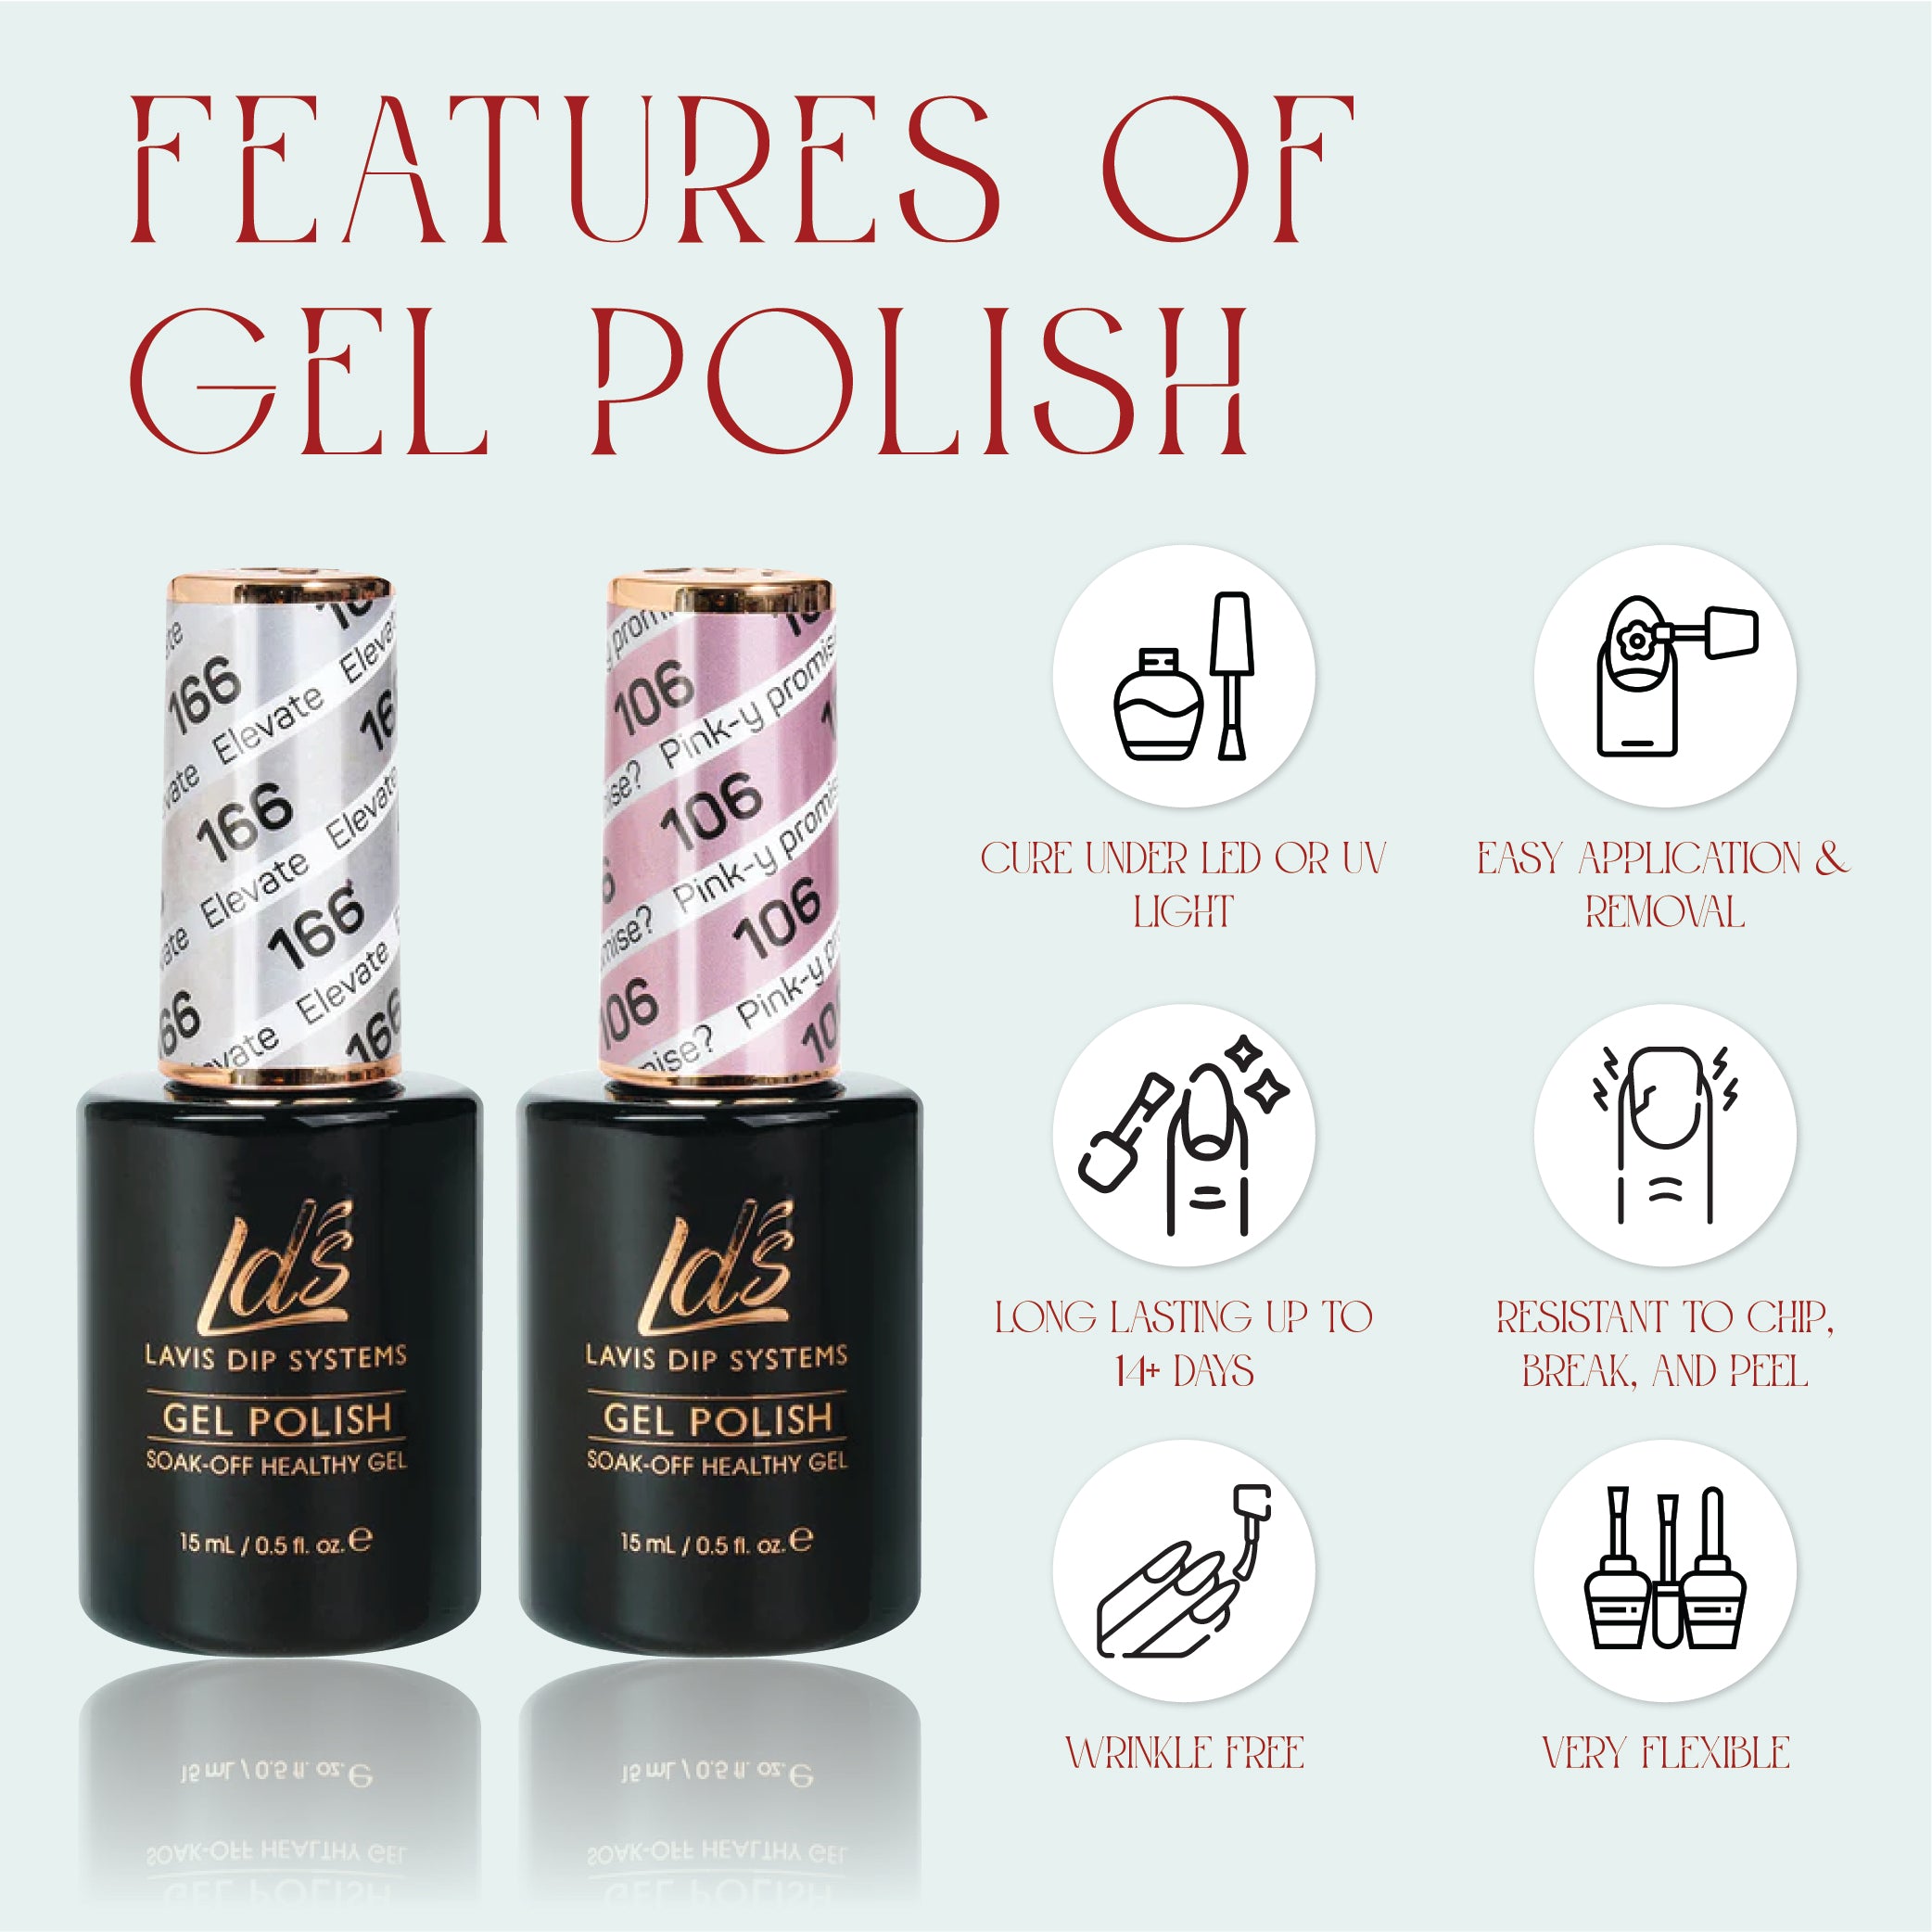 LDS 020 Red Cent - LDS Healthy Gel Polish & Matching Nail Lacquer Duo Set - 0.5oz